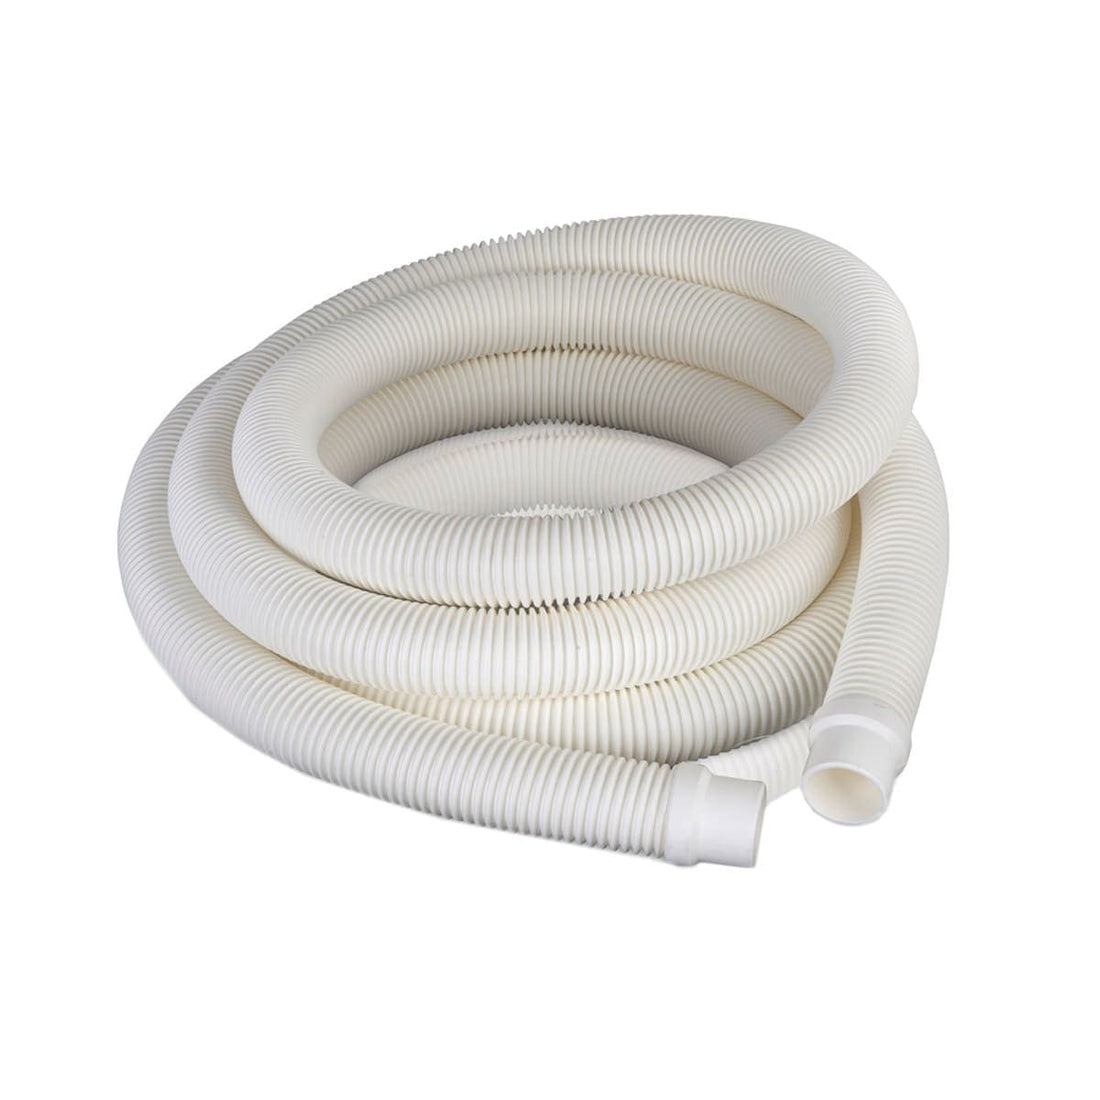 WHITE POOL FILTER HOSE 4M TWO ENDS 32MM - best price from Maltashopper.com BR500011045